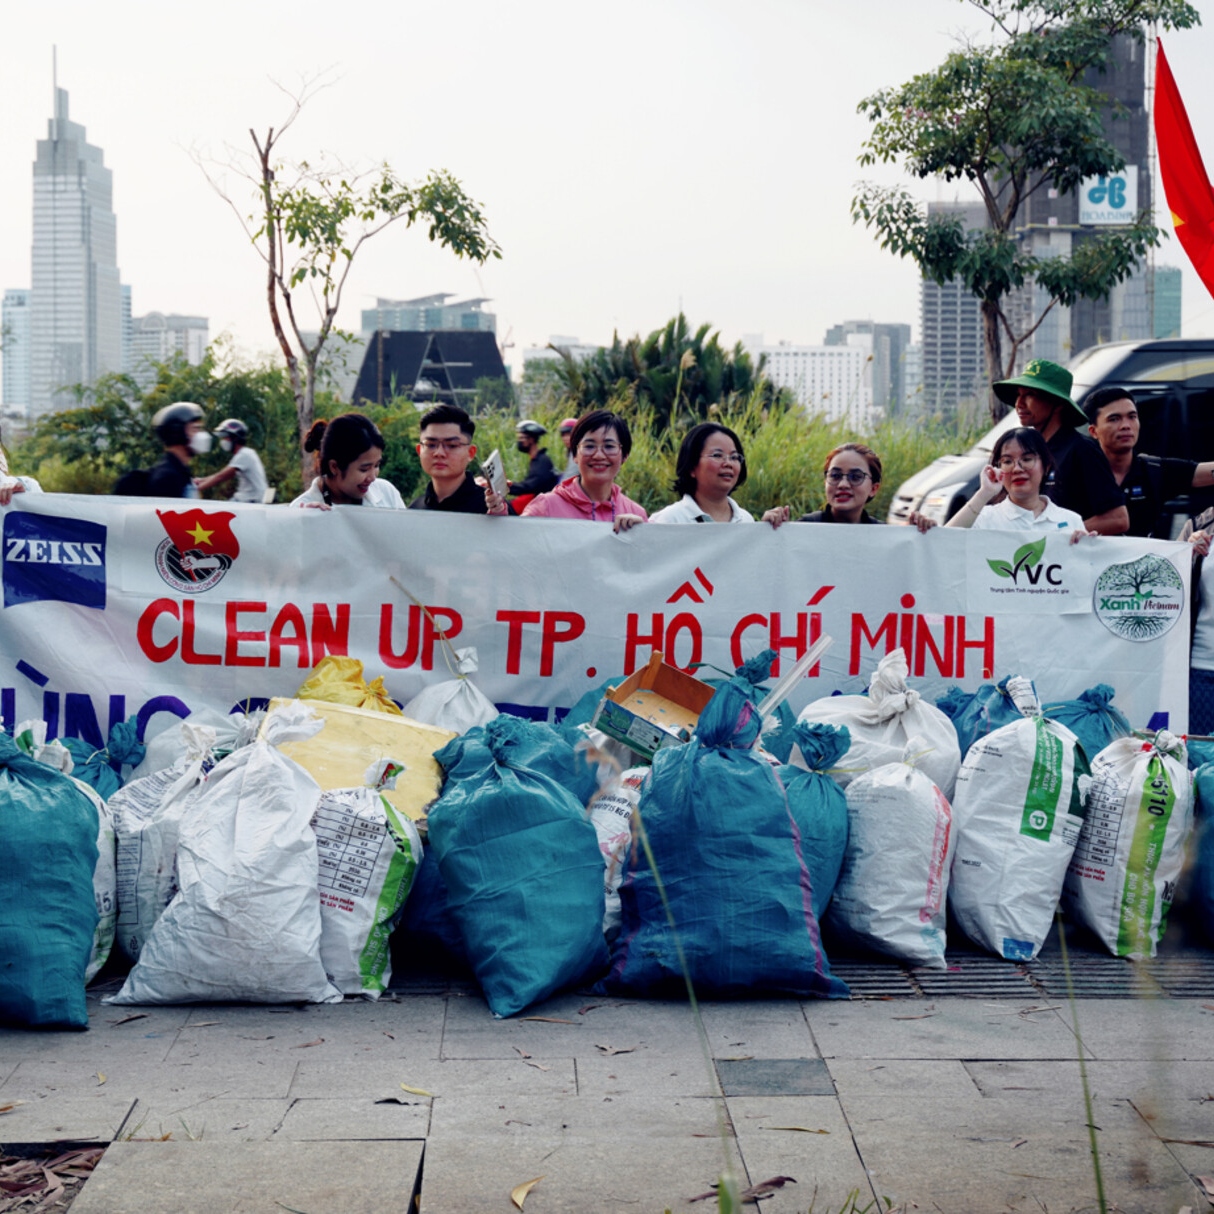 ZEISS employees in Vietnam (Ho Chi Minh & Hanoi) picking up litter on earth day